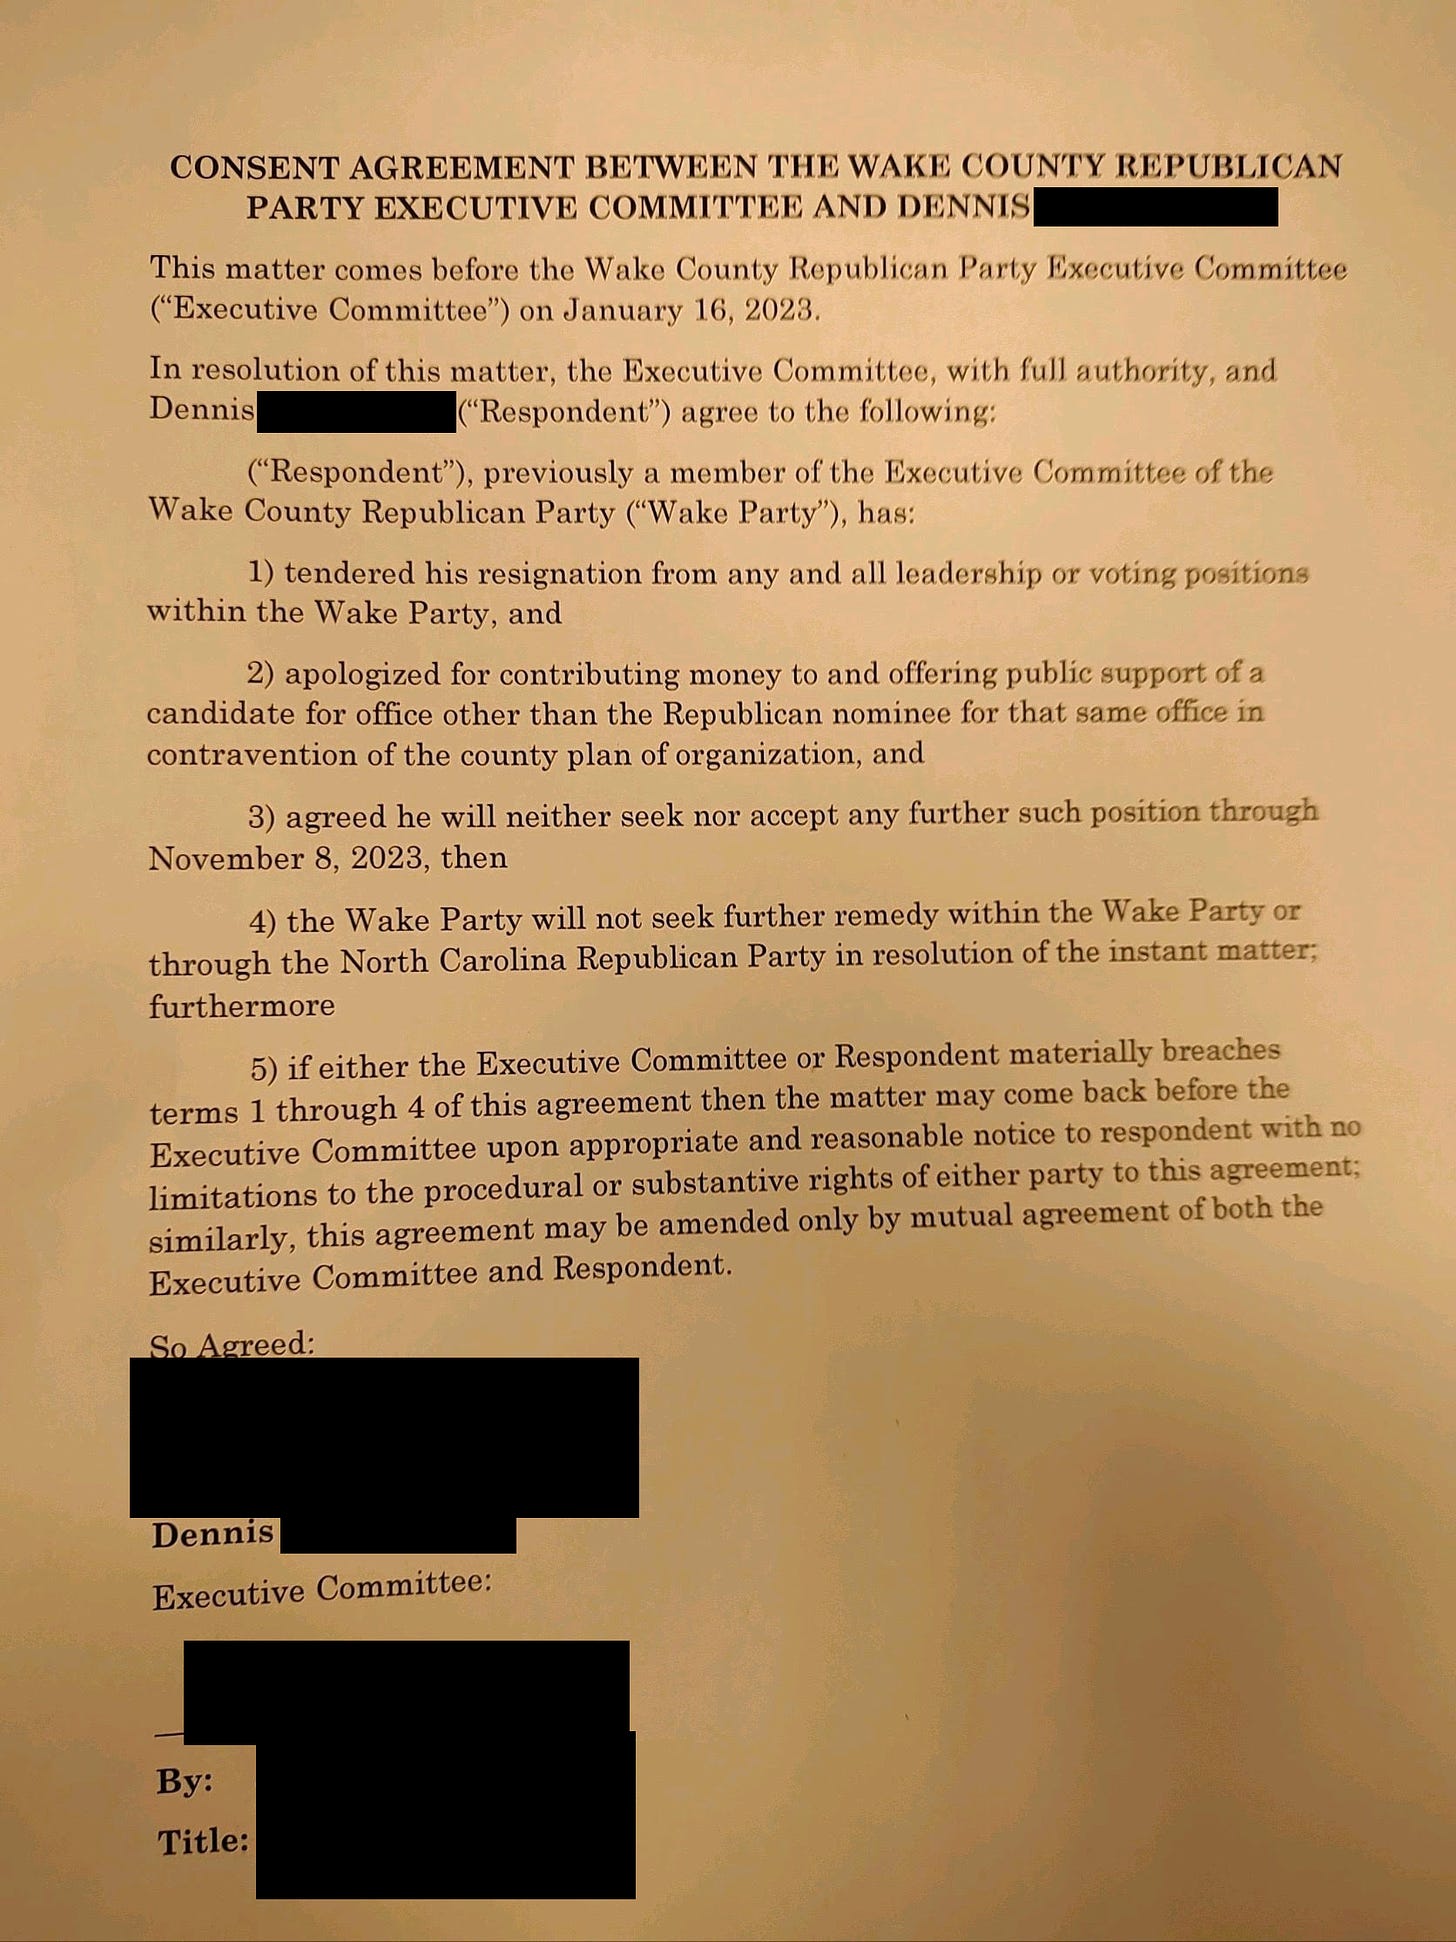 CONSENT AGREEMENT BETWEEN THE WAKE COUNTY REPUBLICAN PARTY EXECUTIVE COMMITTEE AND DENNIS ---